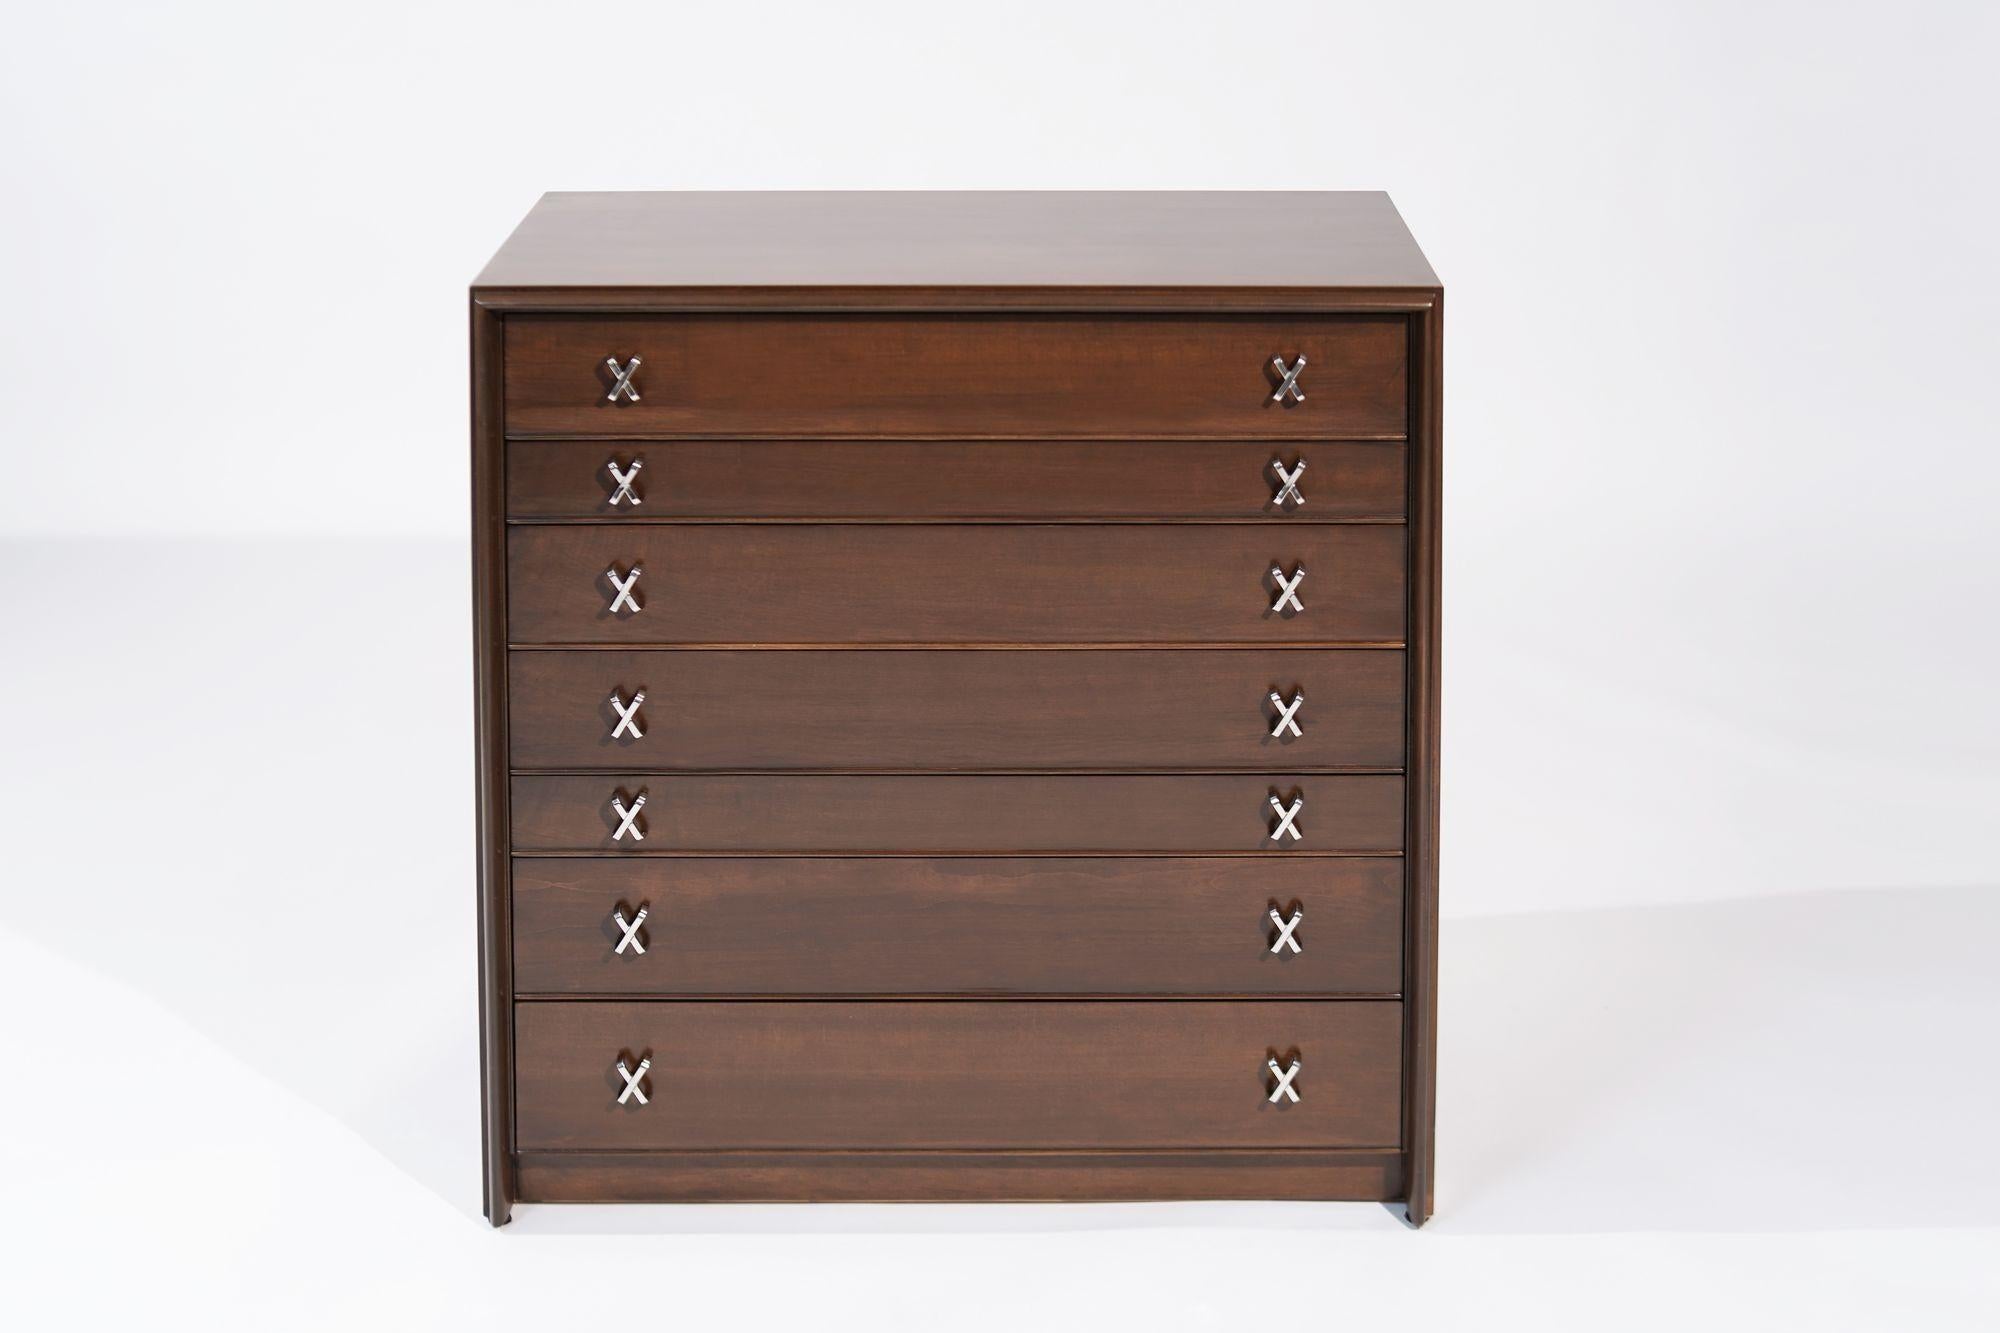 The Gentleman's Chest by Paul Frankl, a tribute to mid-century elegance from the 1950s, meticulously restored to perfection by Stamford Modern. Crafted from exquisite maple, the chest has been transformed with a warm walnut tone, enhancing its